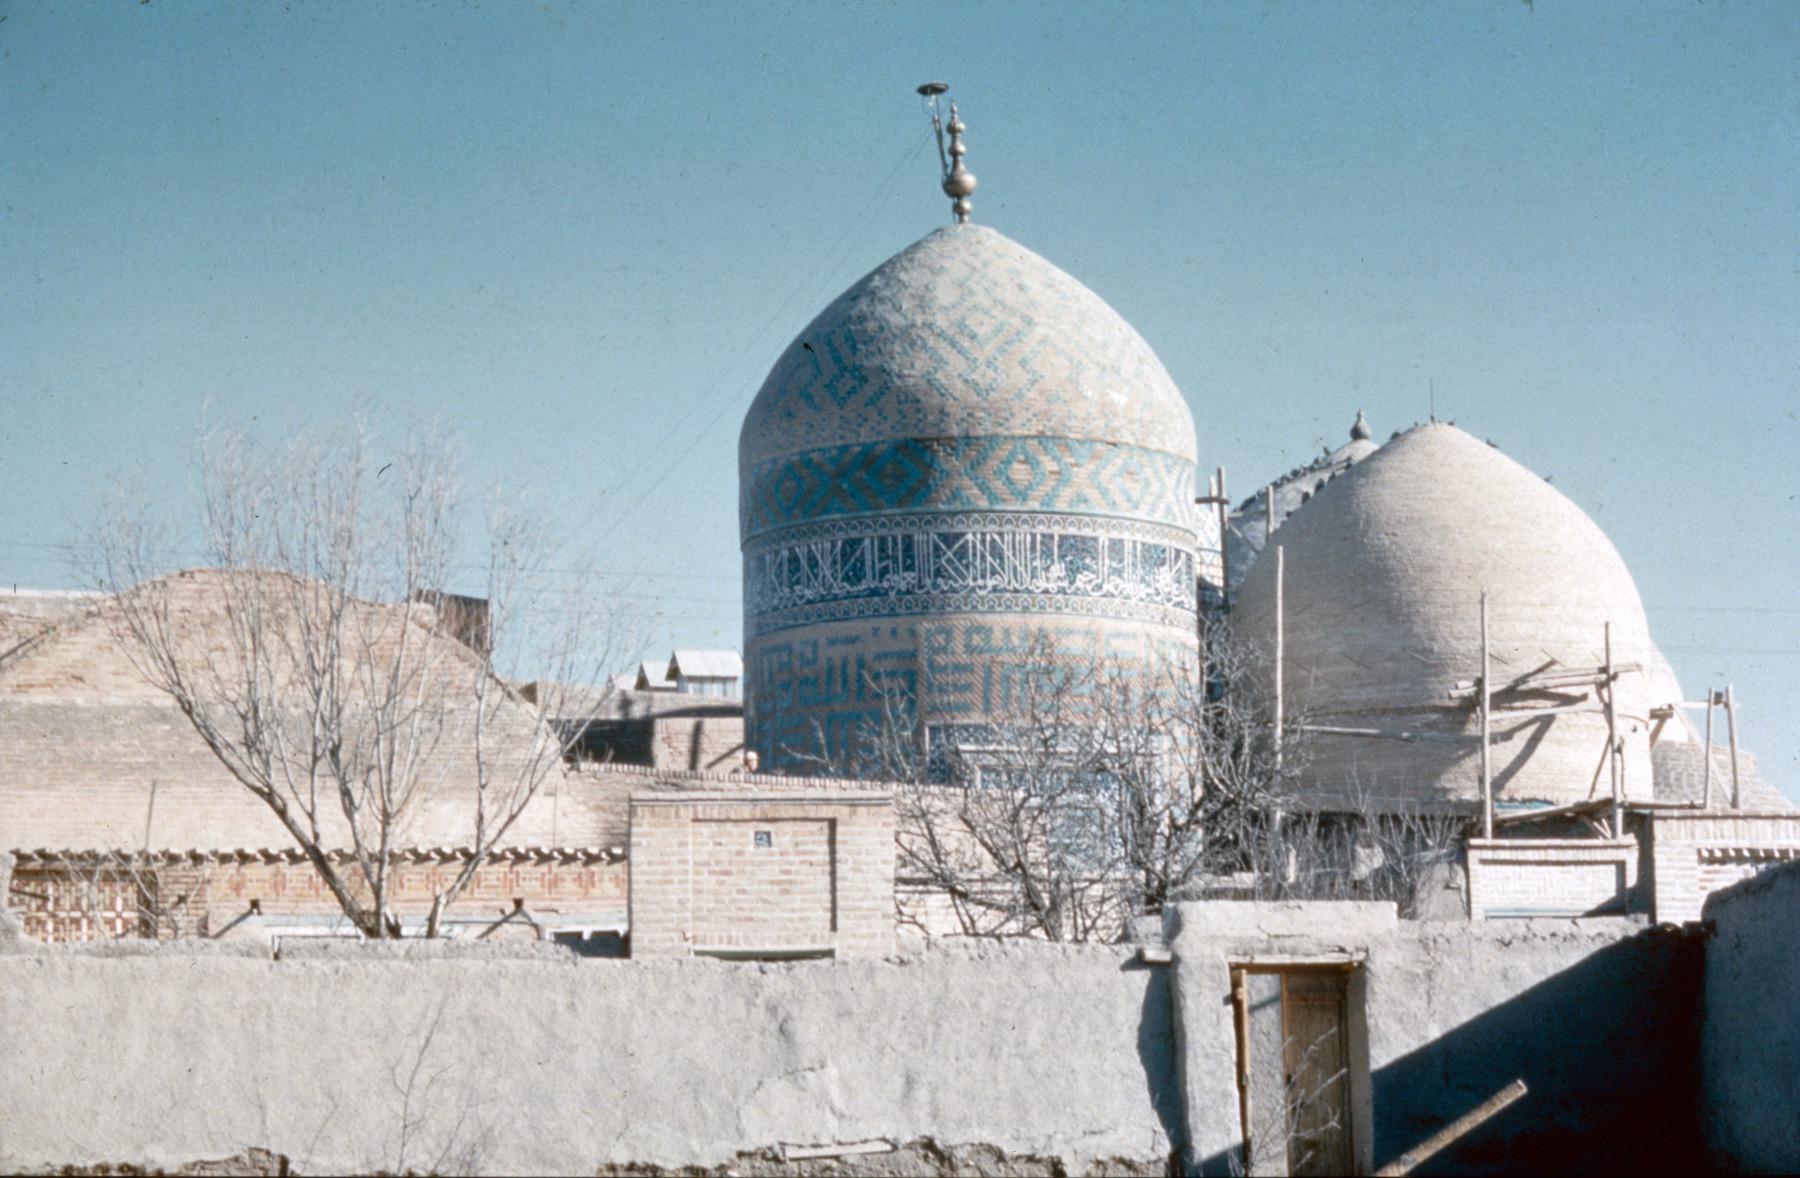 Exterior view from south showing tomb tower of Shaykh Safi (left) and Haramkhana (right)